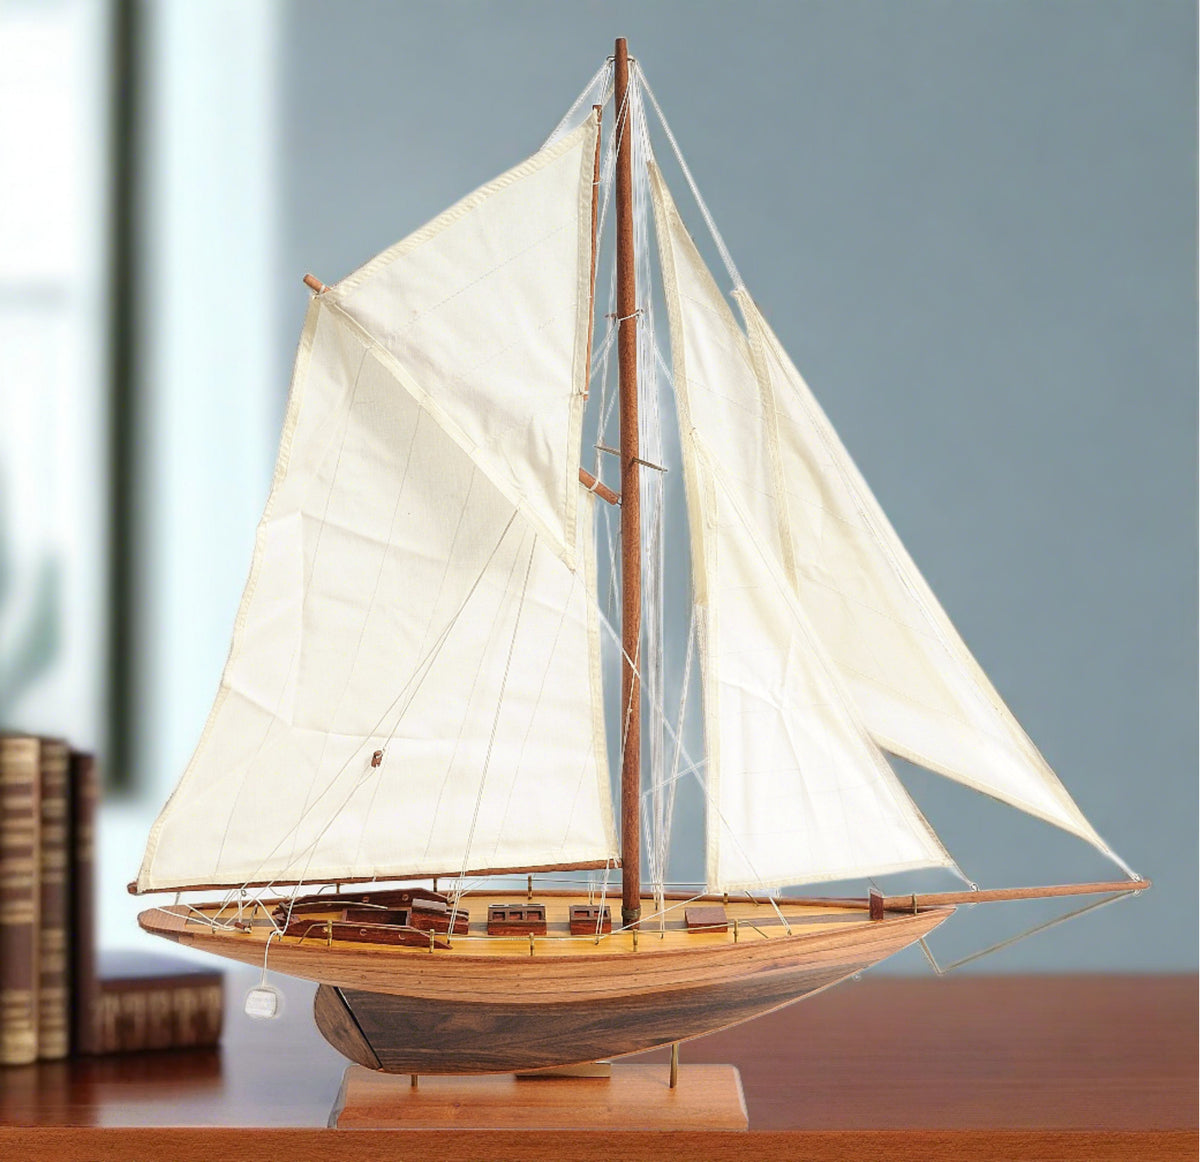 Pen Duick Hand Crafted Model Sailing Boat